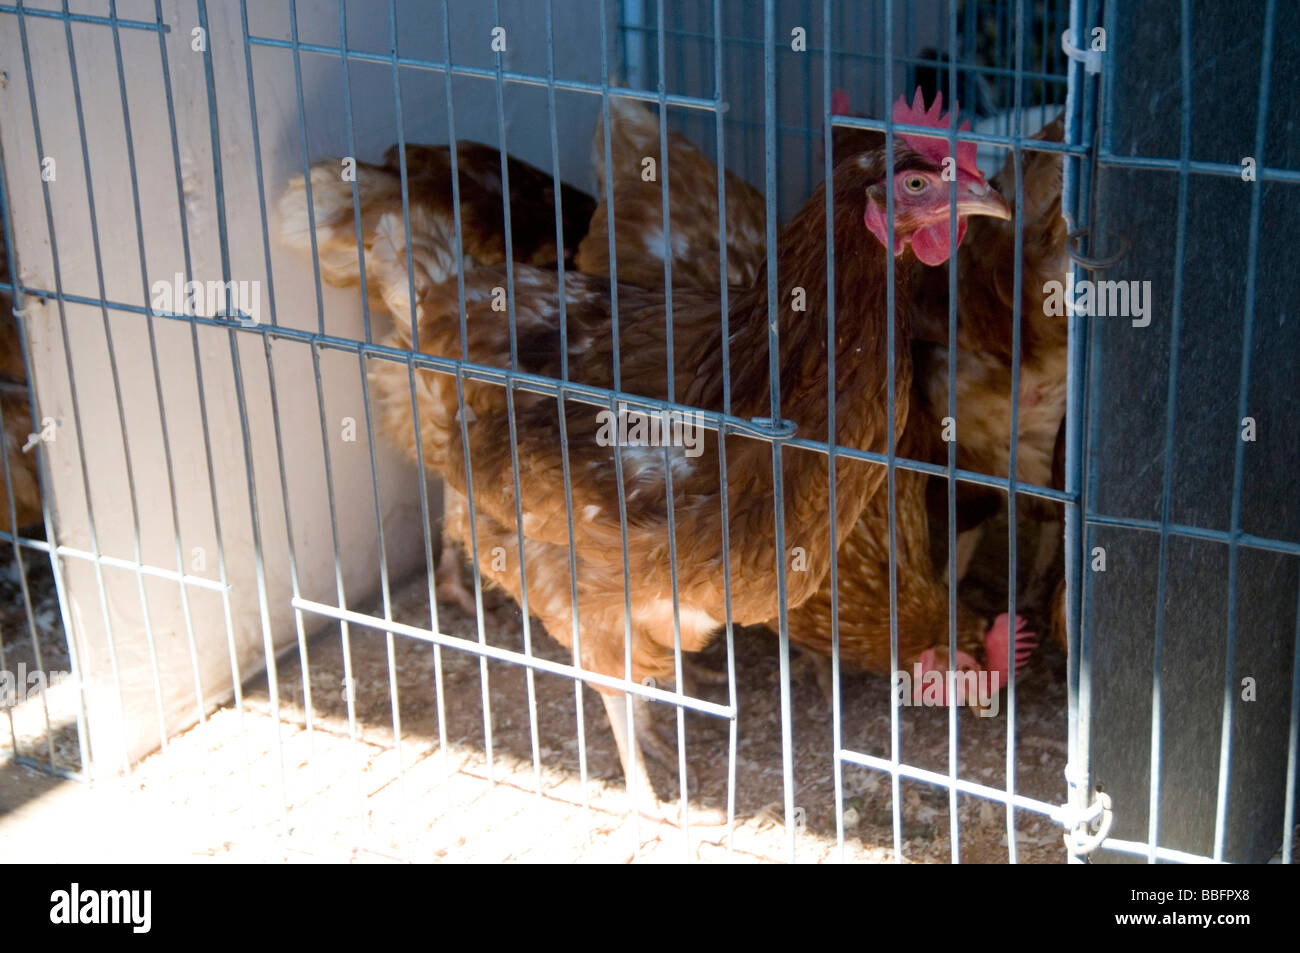 battery hens hen cage caged egg eggs animal welfare crampt cramped small tiny space enhanced intensively farmed intensive farmin Stock Photo